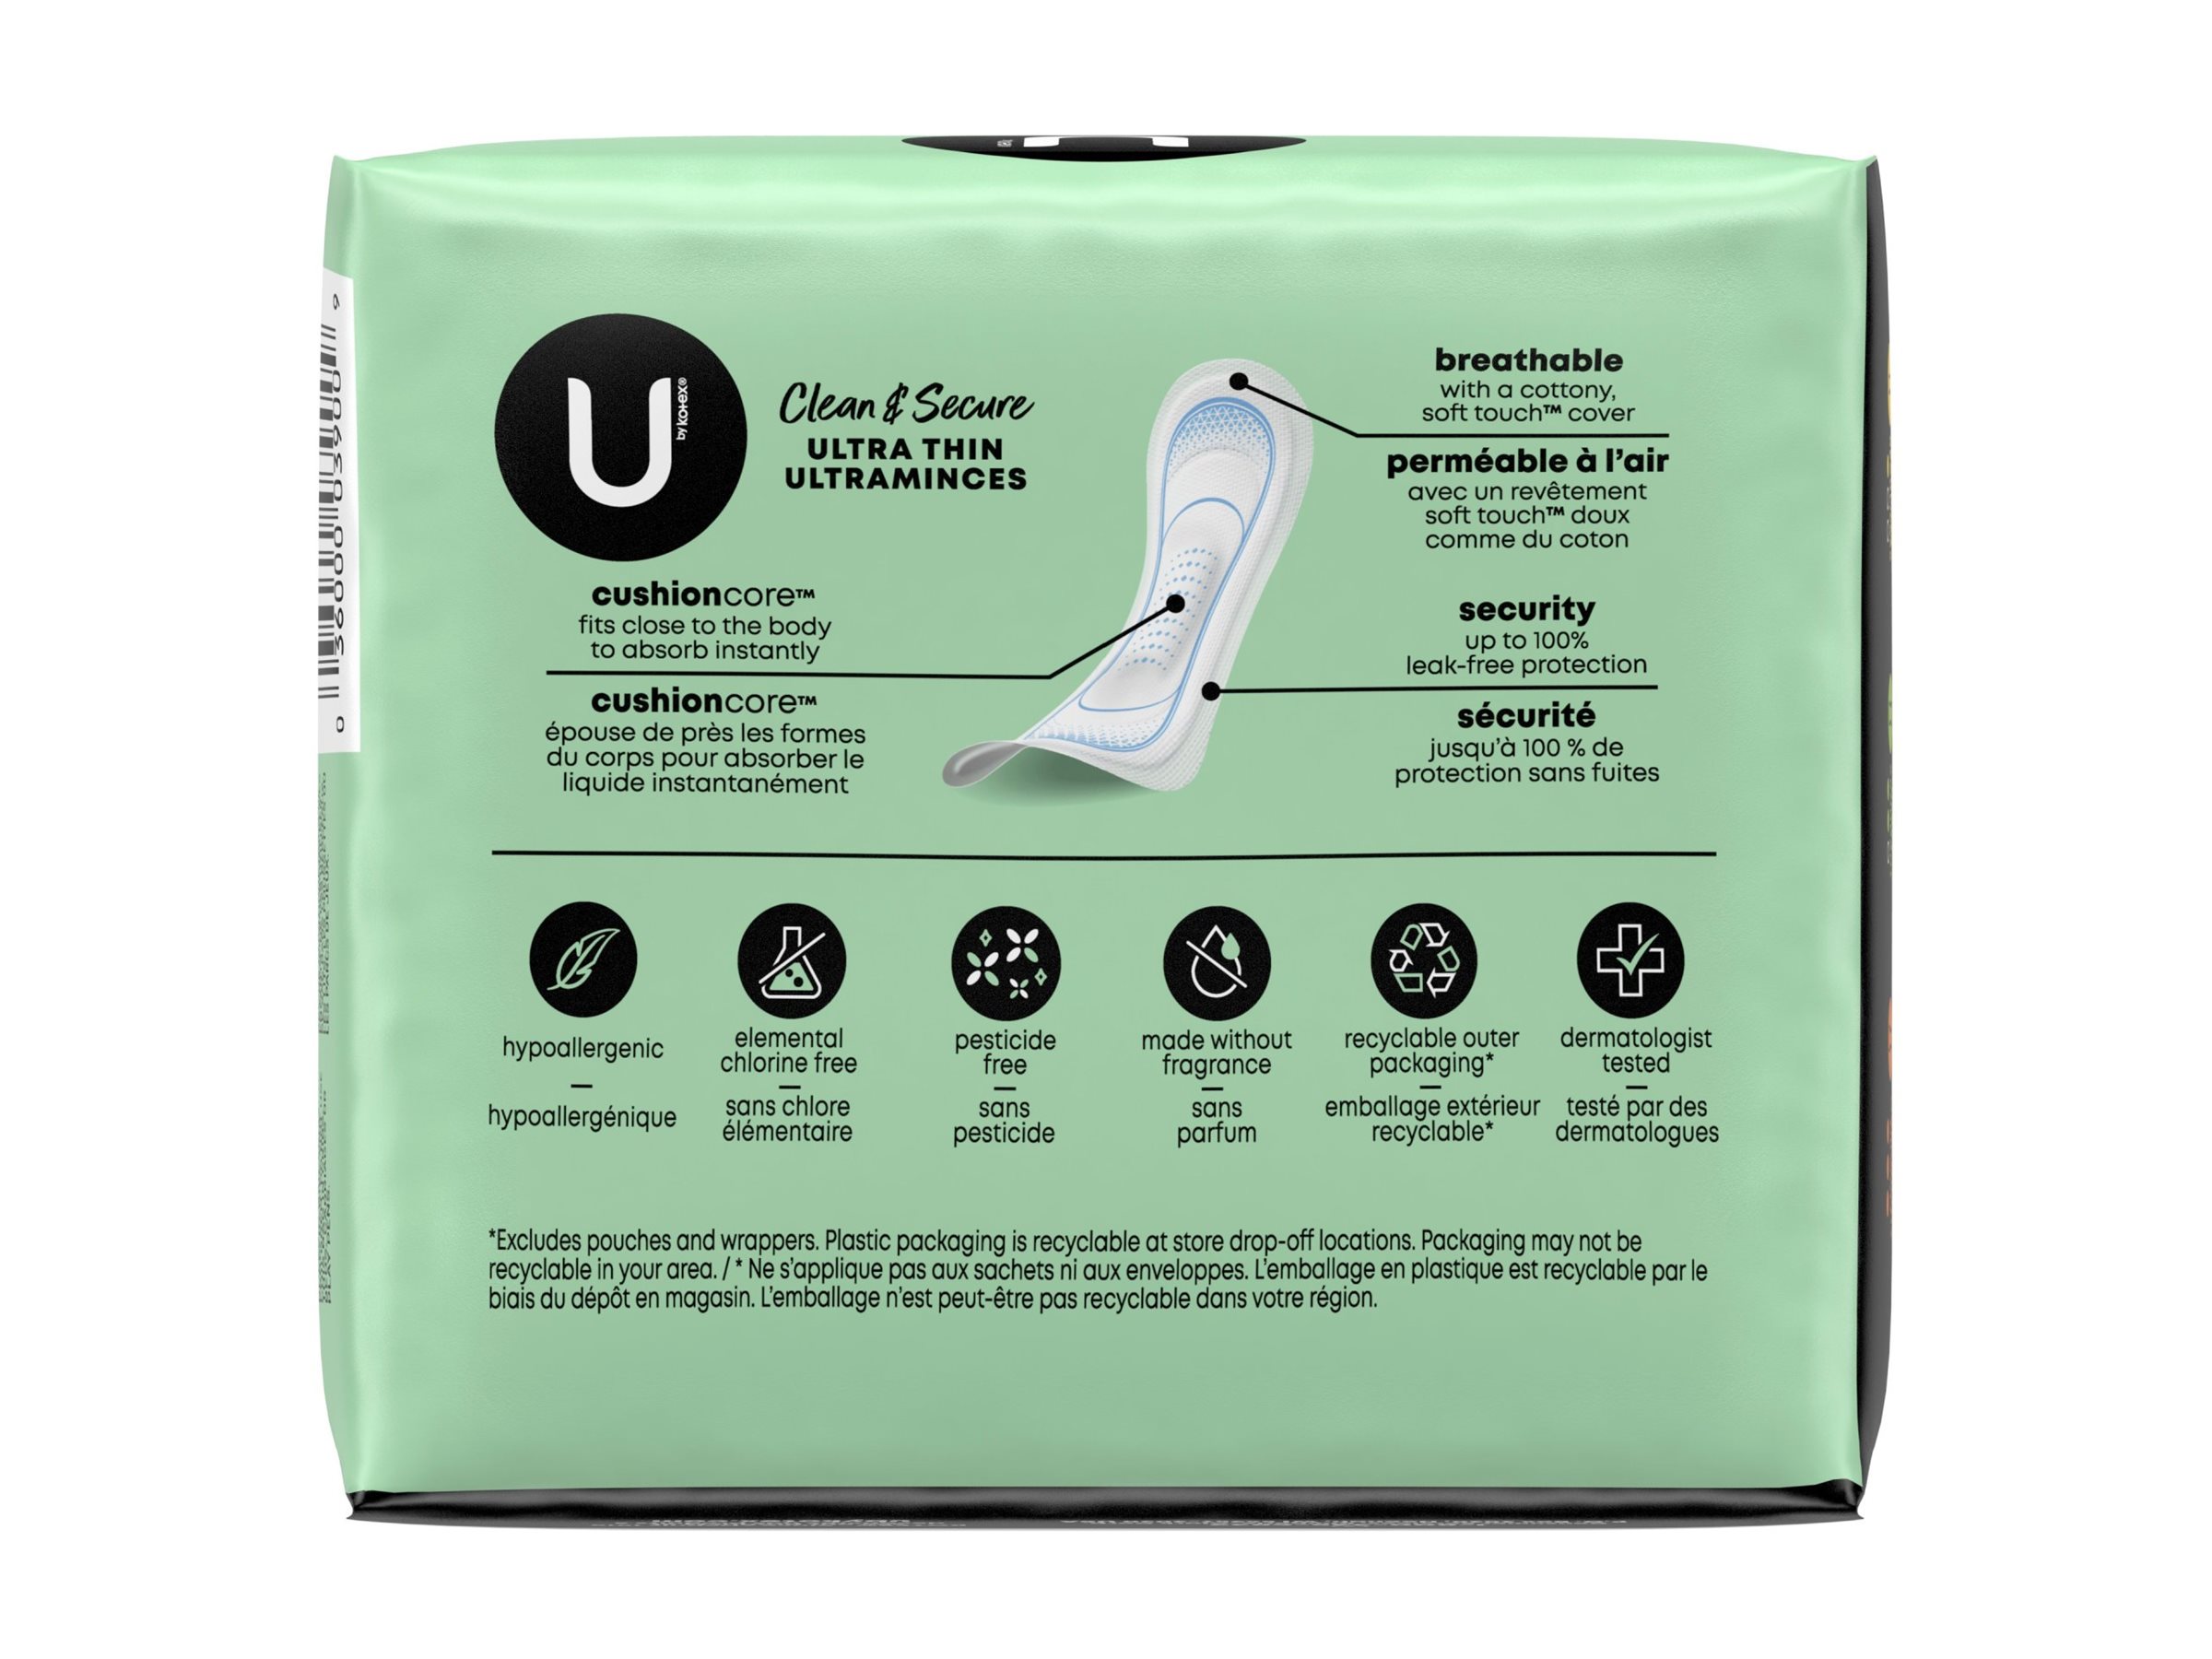 U by Kotex Clean & Secure Ultra Thin Sanitary Pads - Heavy